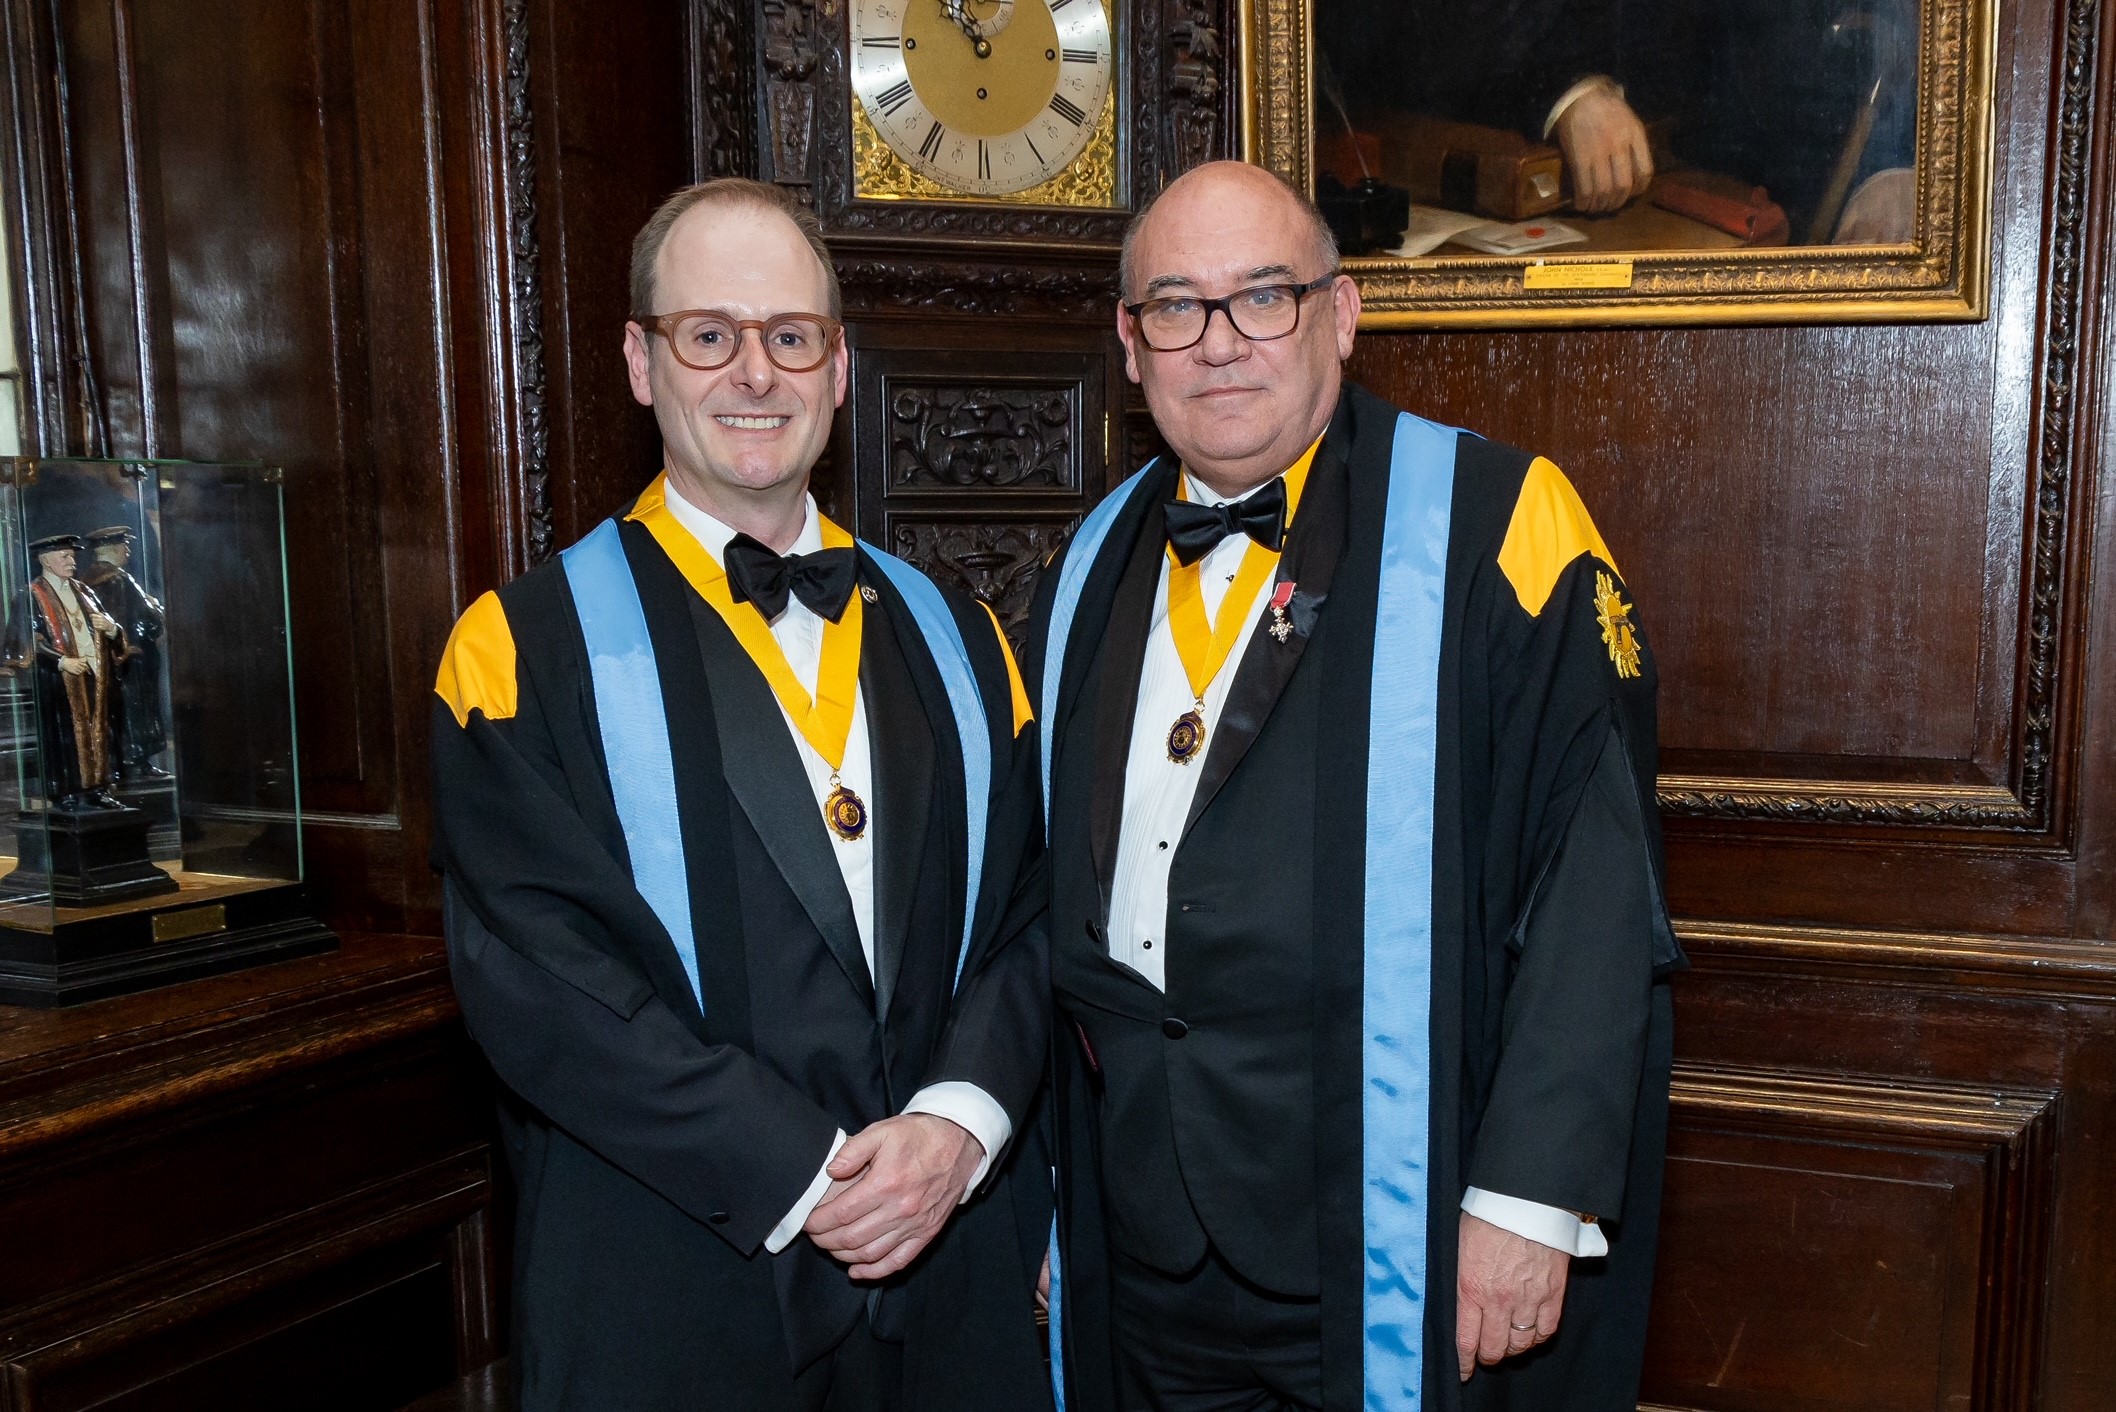 David Cooper and David Stevens named court assistants to the Worshipful Company of Engineers